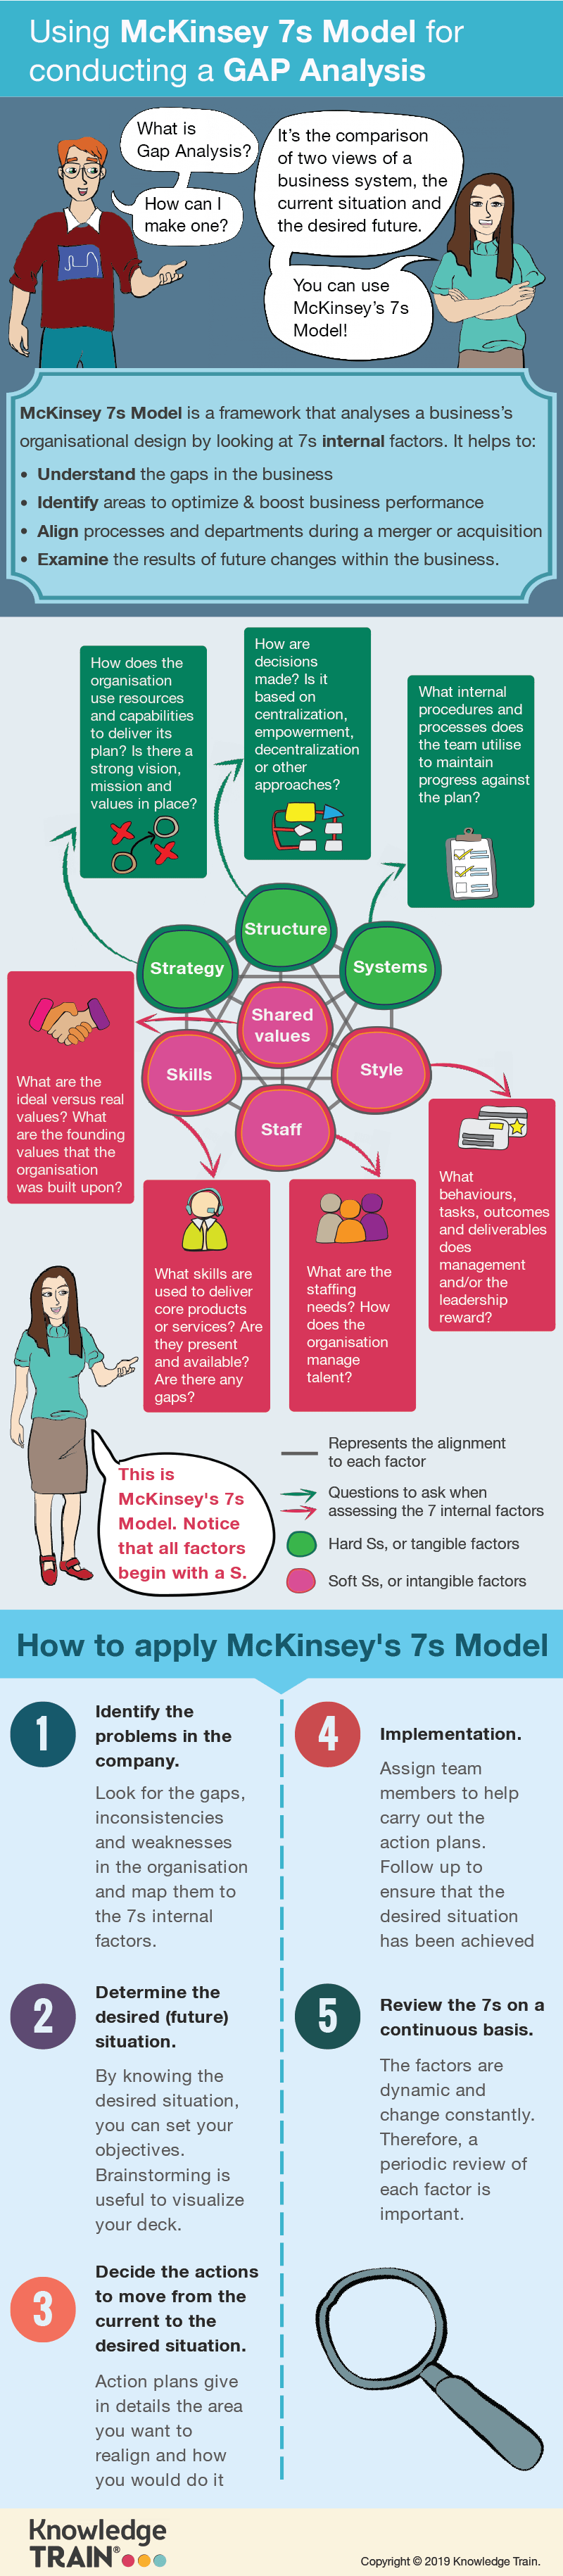 McKinsey 7-S model business analysis technique infographic.